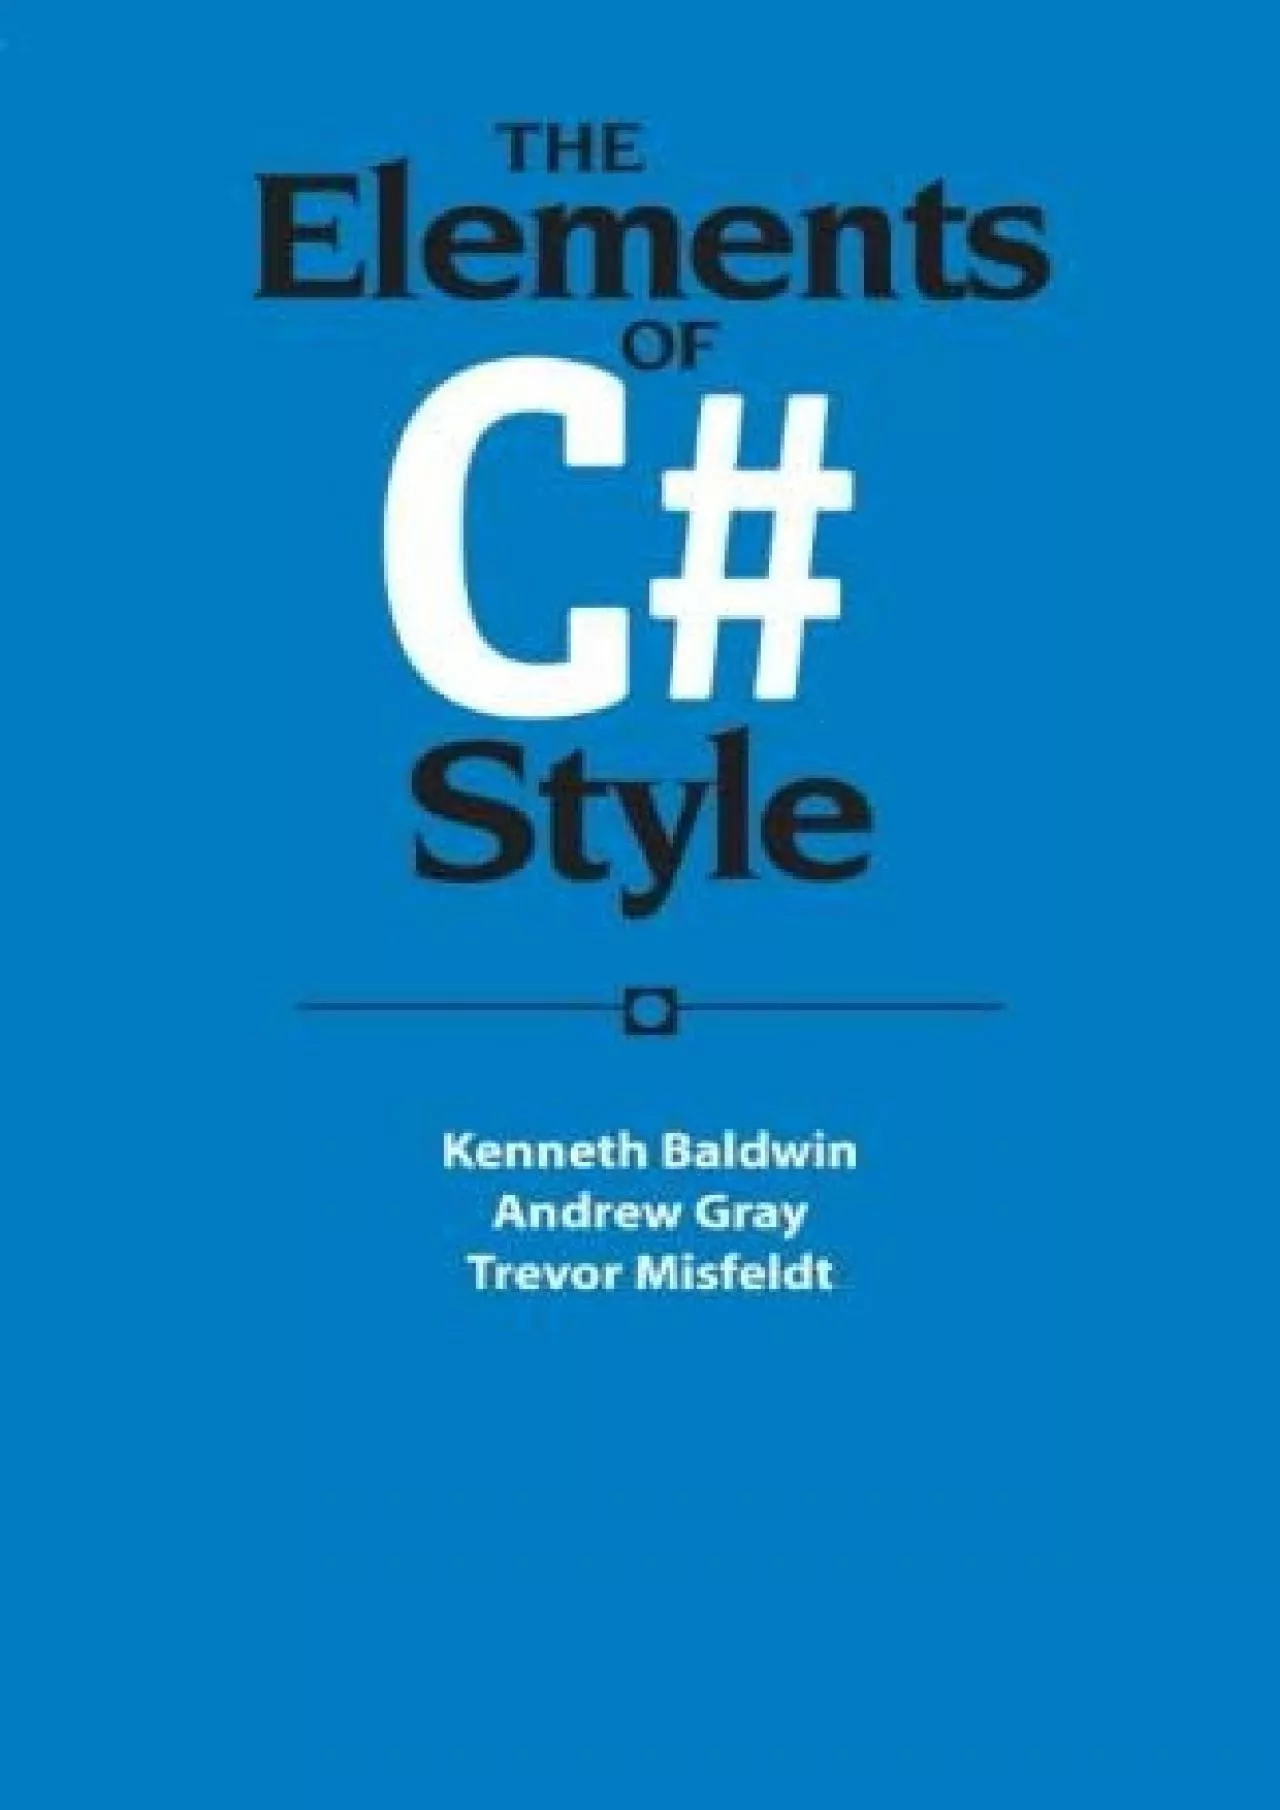 [PDF]-The Elements of C Style